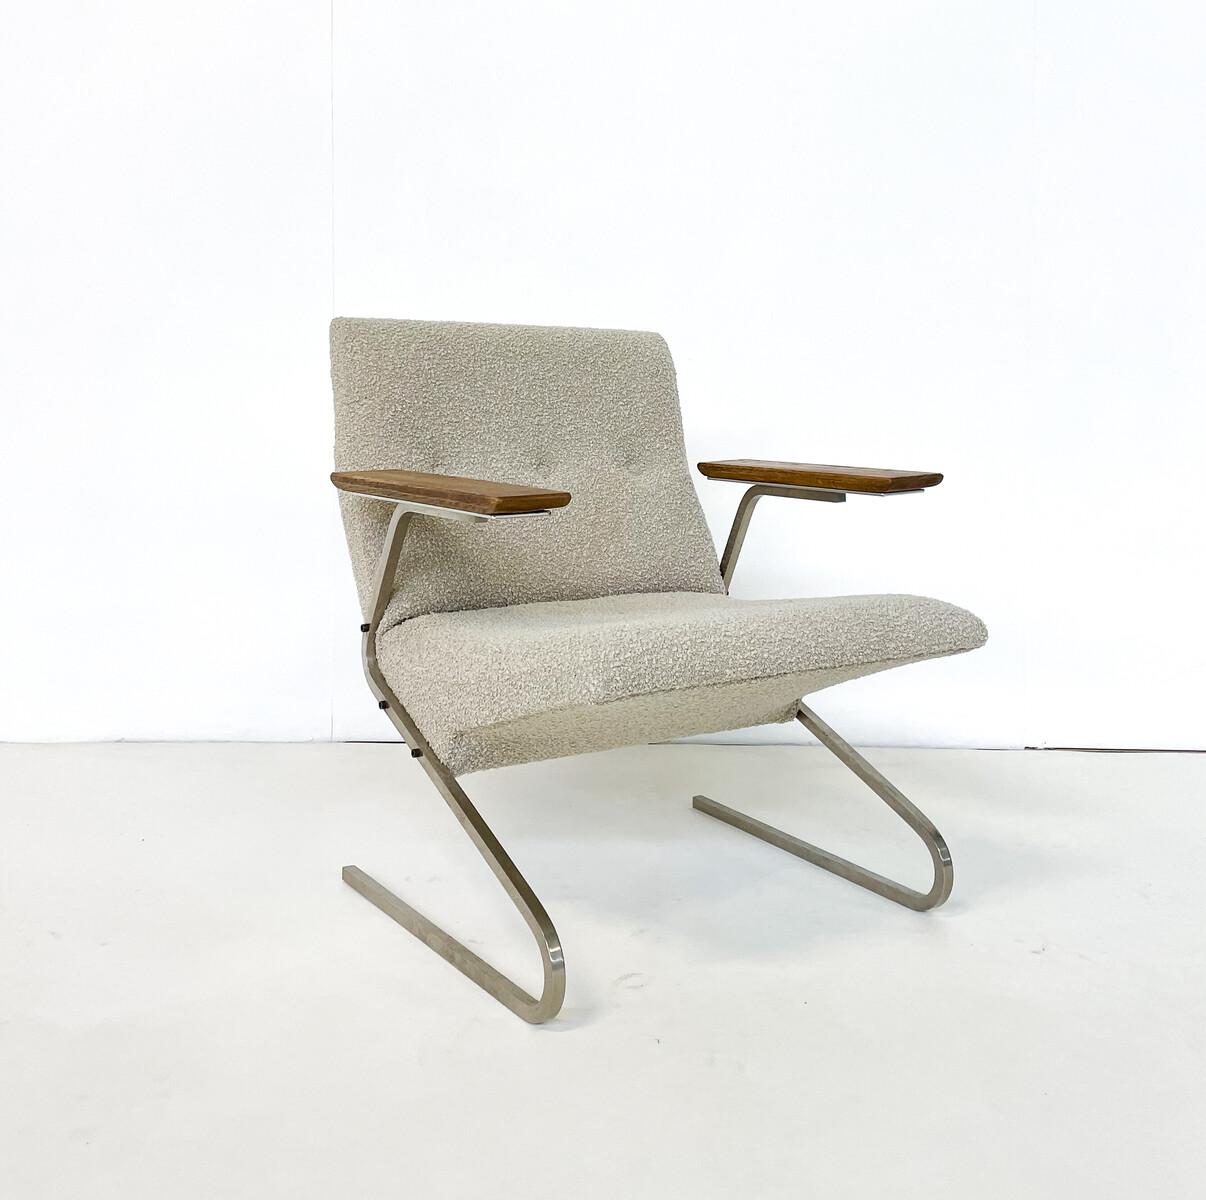 Mid-Century Modern Armchair ‘Cantilever’ by George van Rijck for Beaufort  For Sale 2